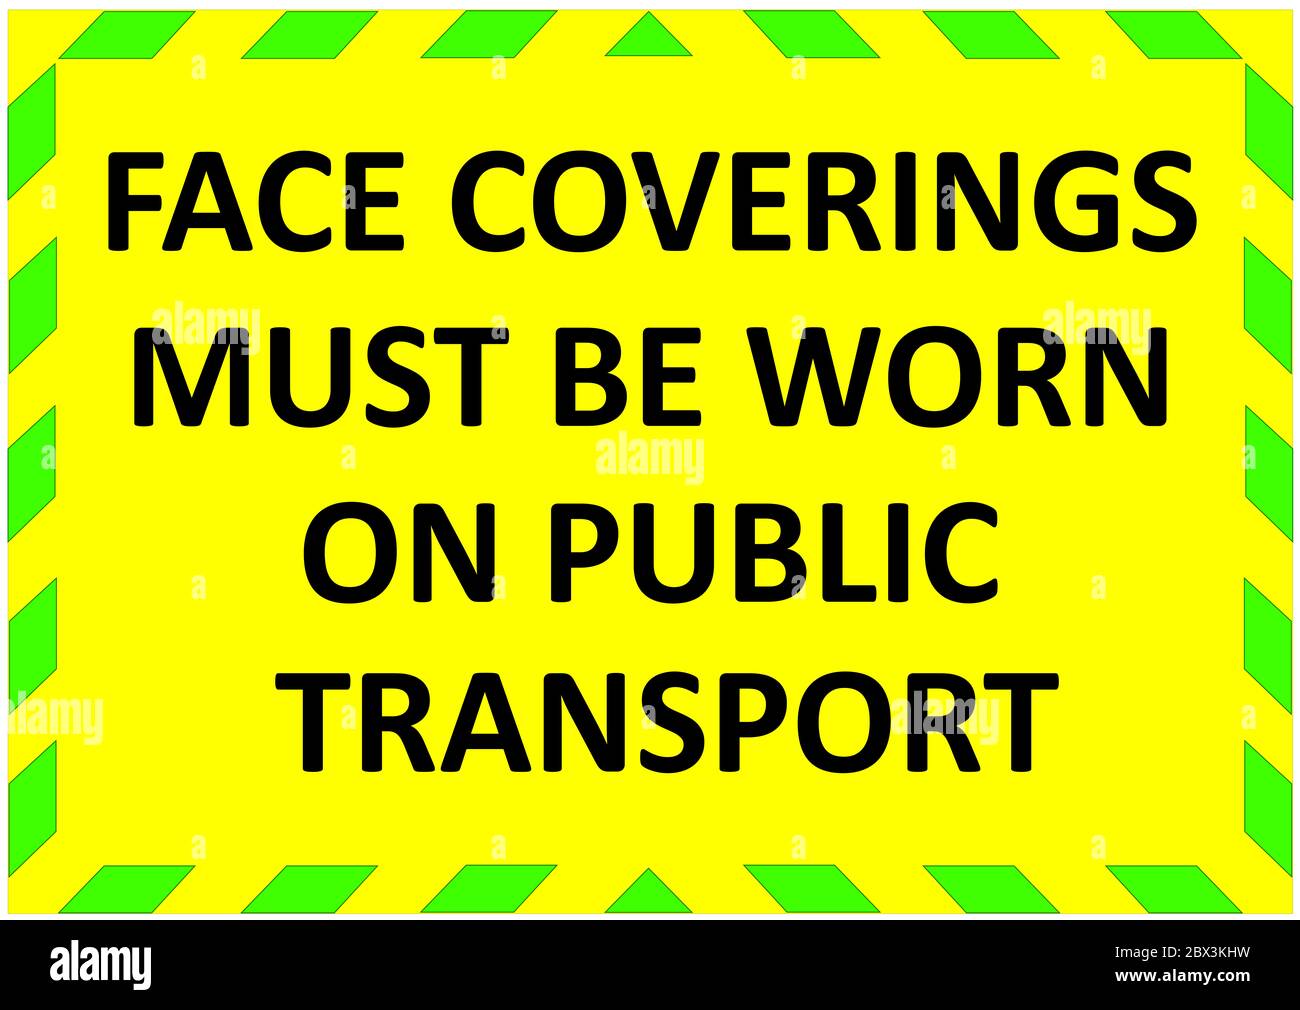 FACE COVERINGS MUST BE WORN ON PUBLIC TRANSPORT warning sign. Green quarantine sign that help to battle against Covid-19 in the United Kingdom. Vector Stock Photo